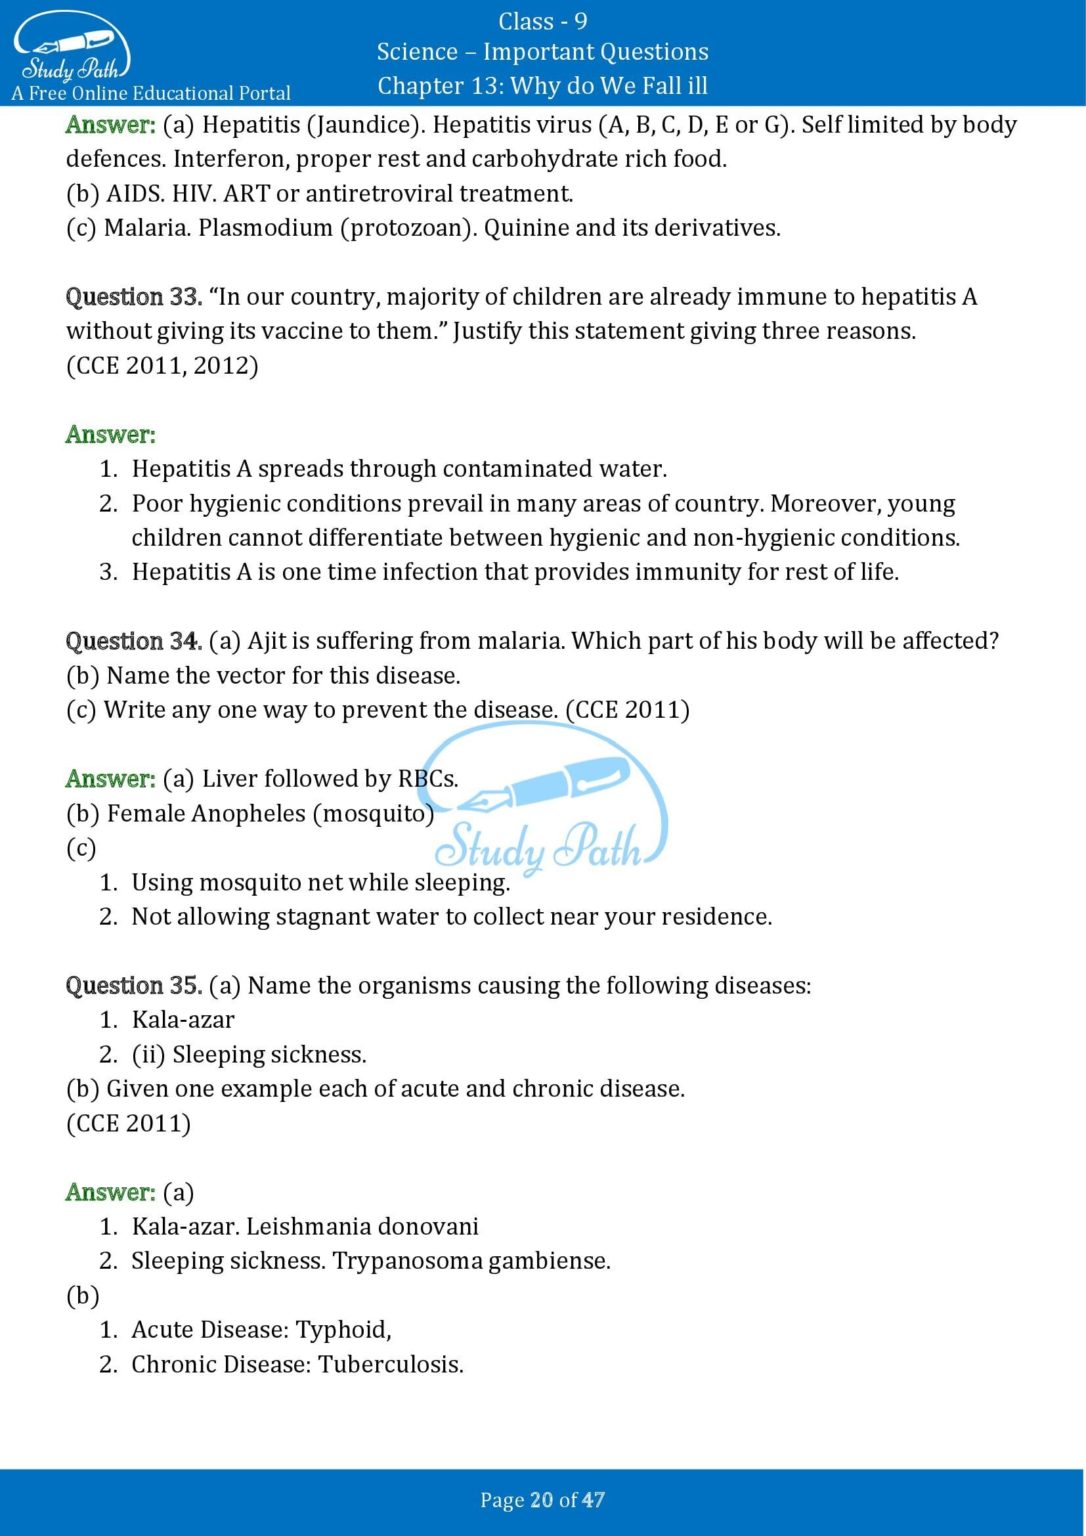 class 9 science chapter 13 case study questions